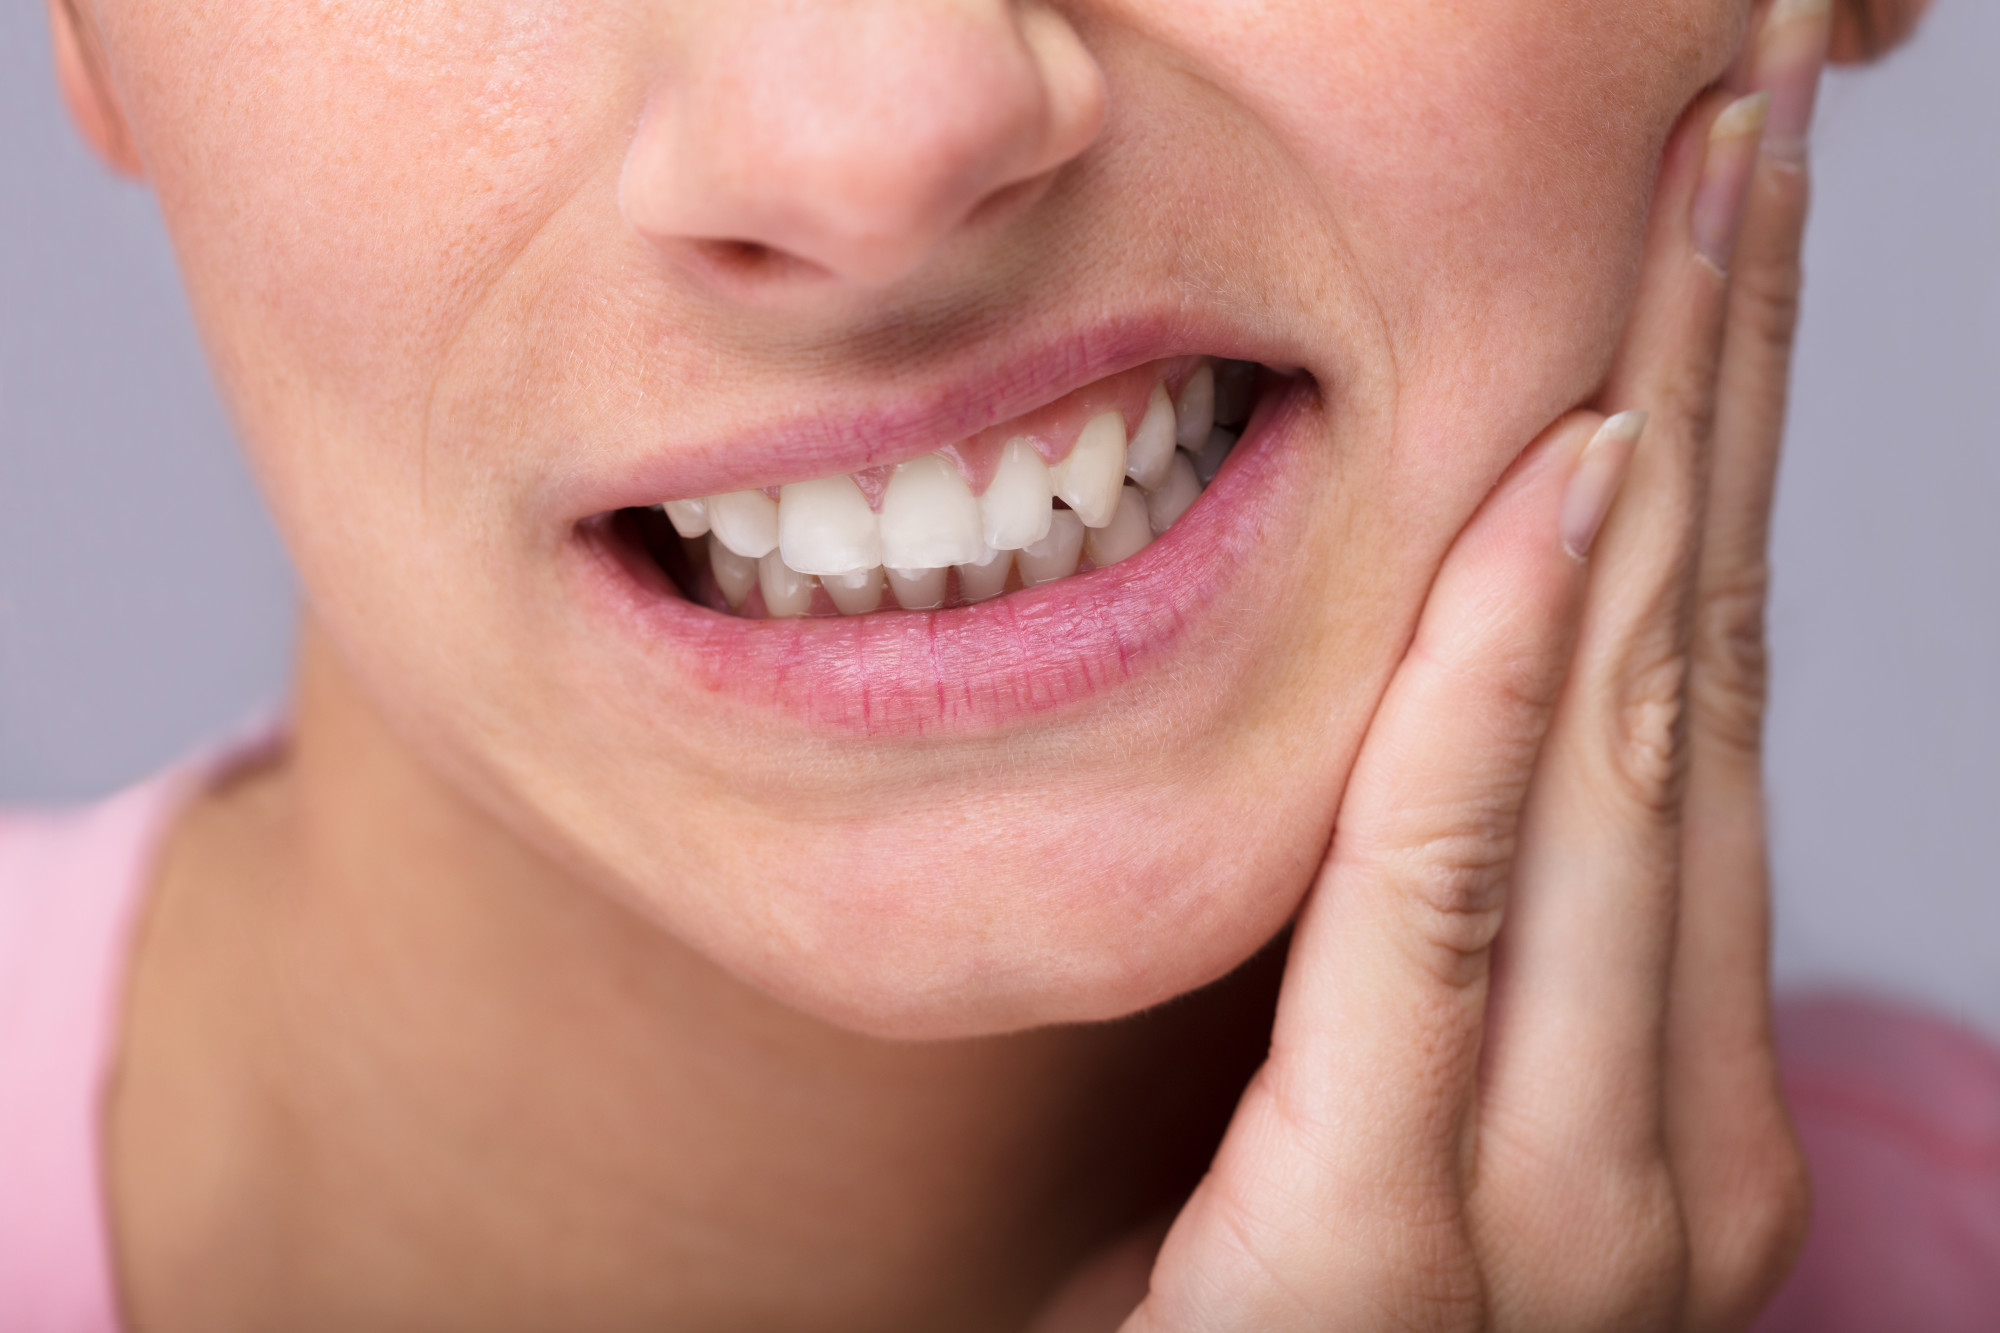 Are you tired of dealing with wisdom tooth pain? Click here for five telltale signs that your wisdom teeth need to be removed.